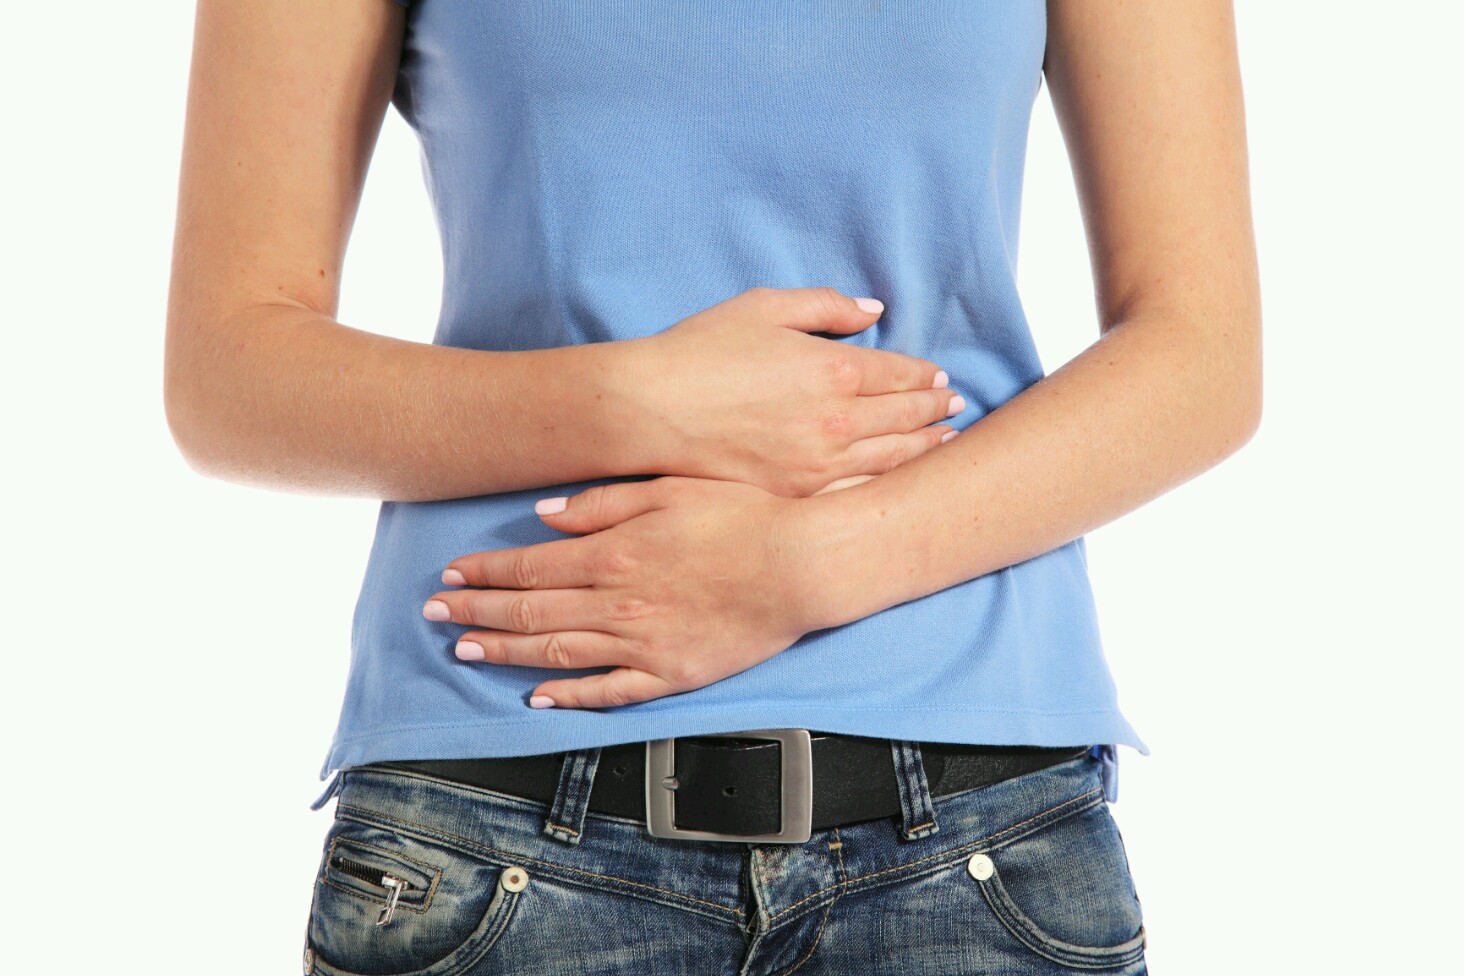 What Is IBS?